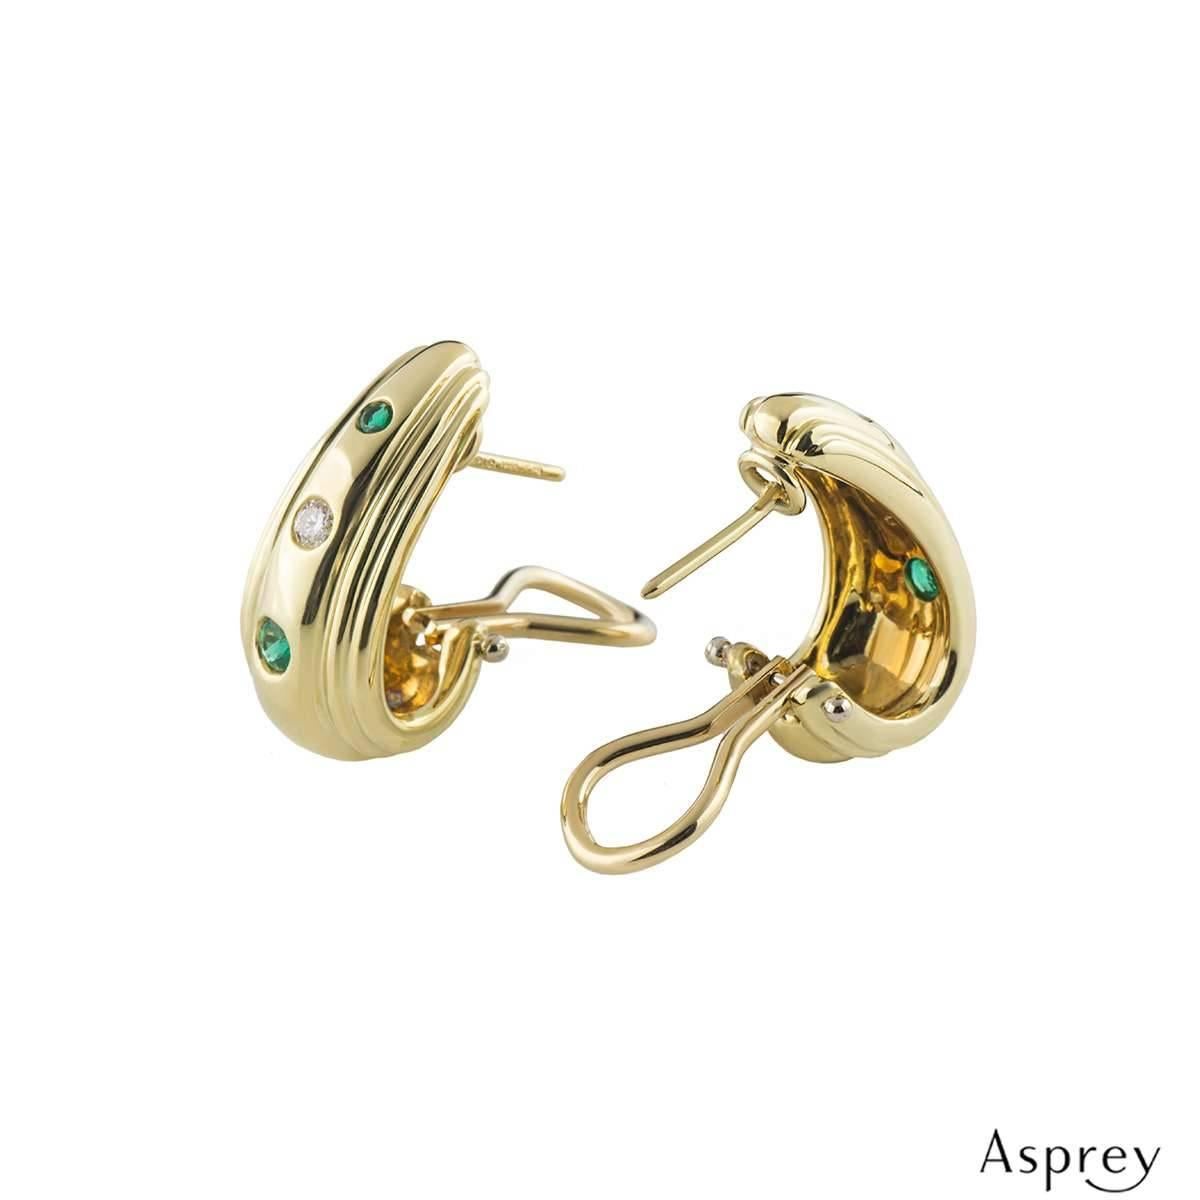 A stylish pair of 18k yellow gold diamond and emerald earrings by Asprey. The earrings comprise of a gold hoop with 2 round brilliant cut emeralds set vertically in a tension setting, alternating with a round brilliant cut diamond also in a tension